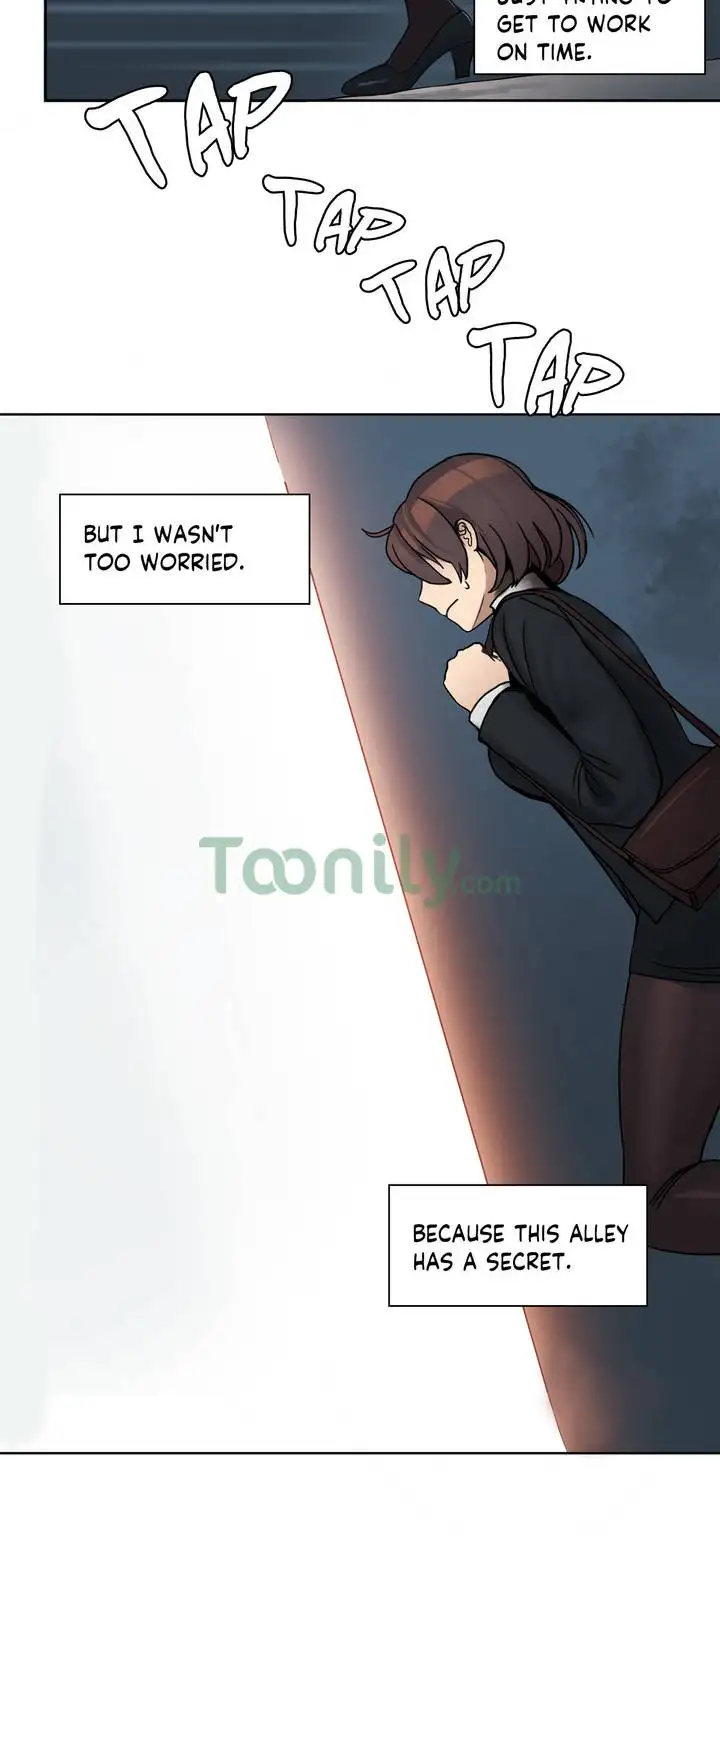 The Girl That Got Stuck in the Wall - Chapter 1 Page 2